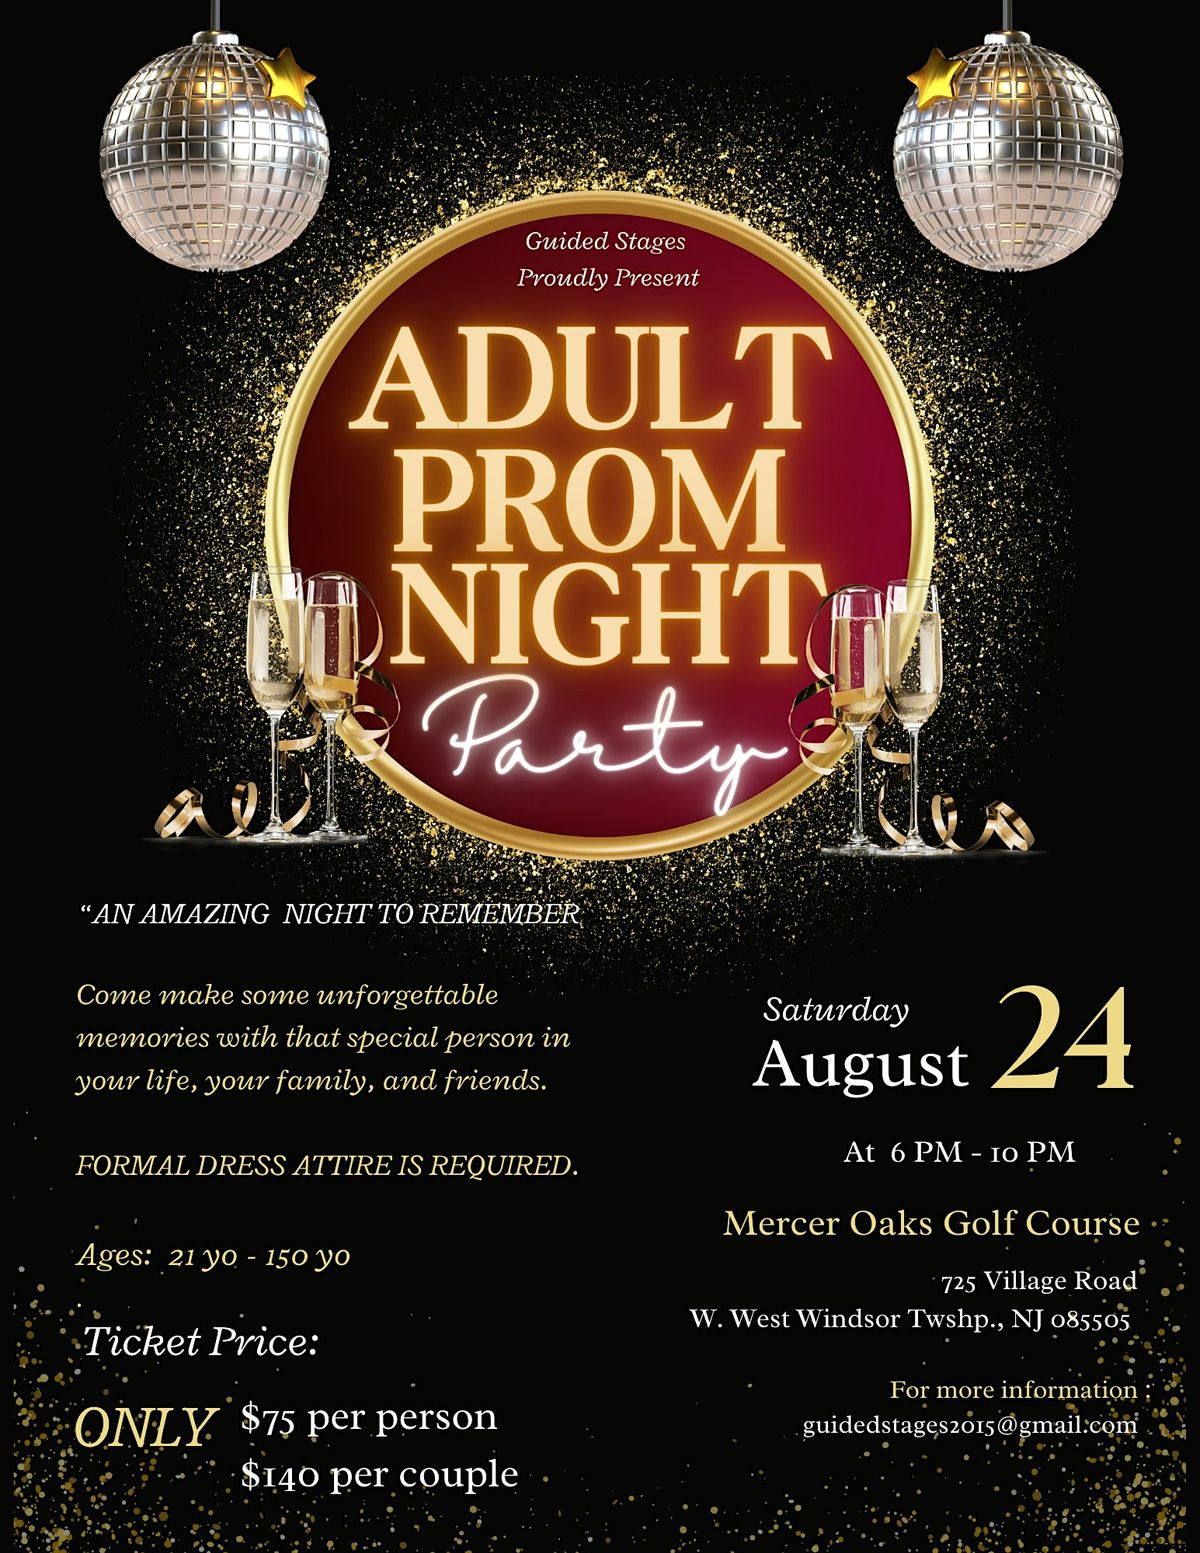 Guided Stages Adult Prom Night